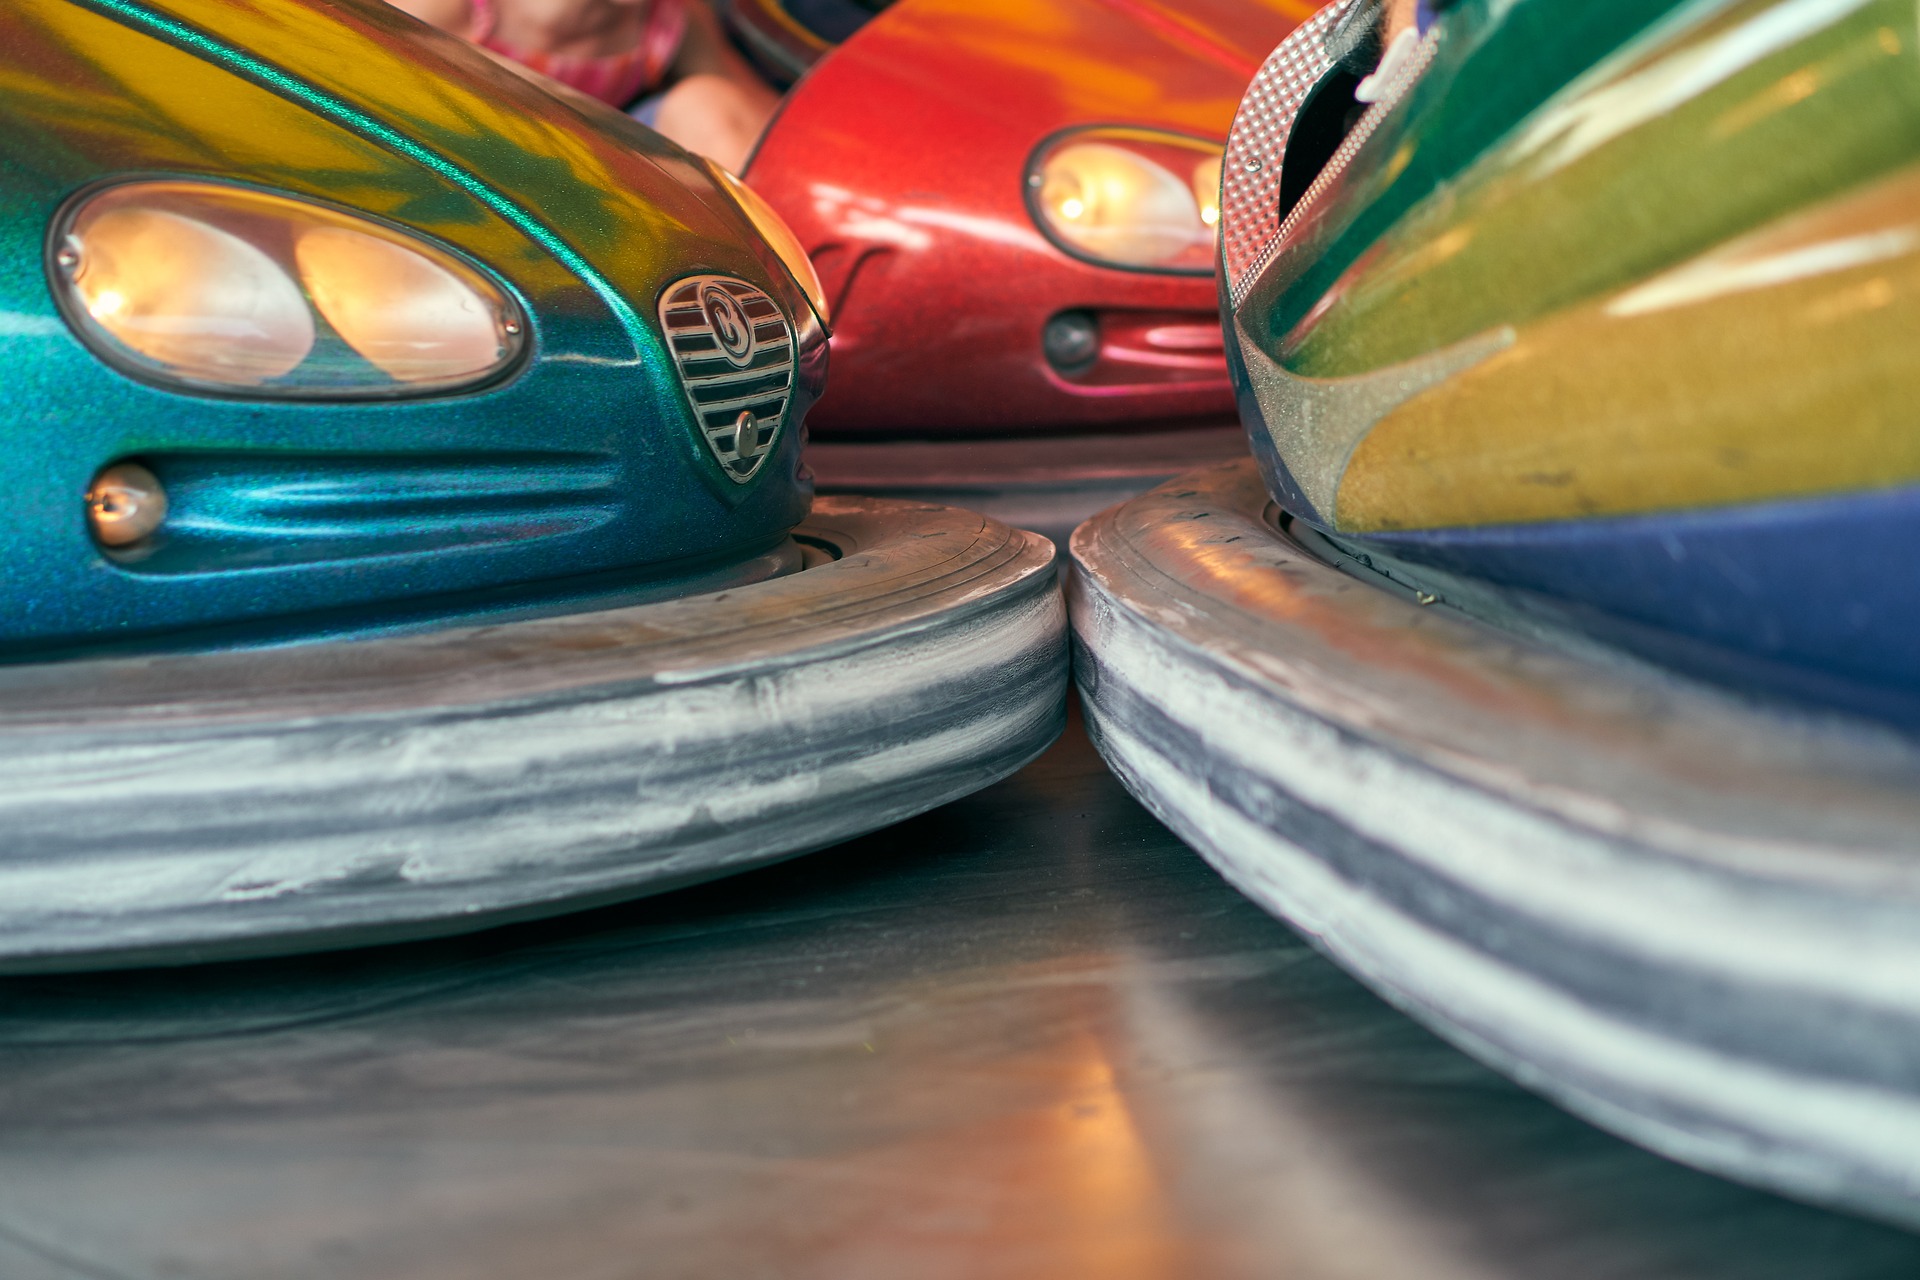 Enjoy bumper cars and more on your list of activities in Austin